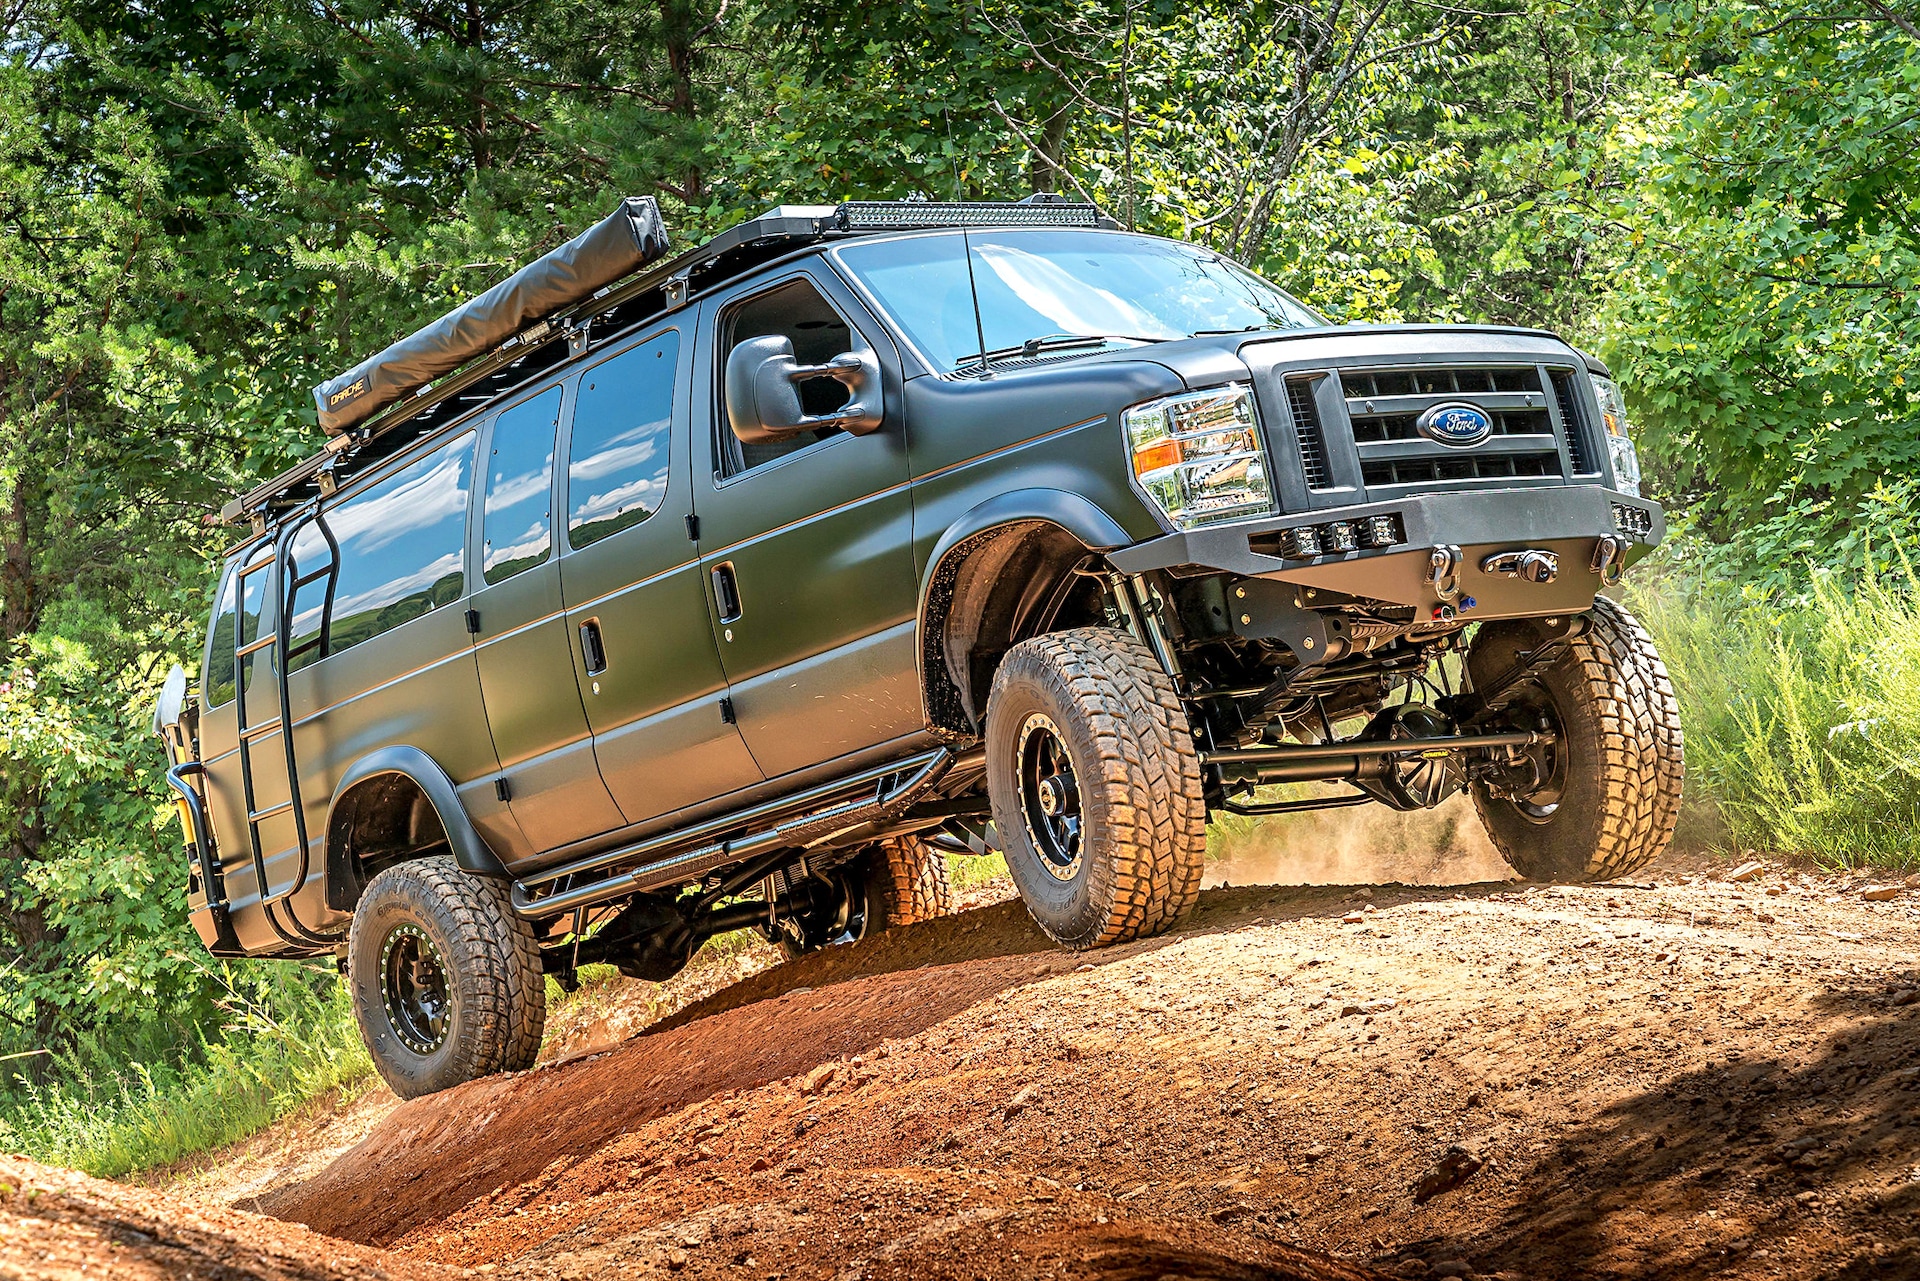 The Bat Van: Conquering SoCal With a 2002 Ford E-350 4x4